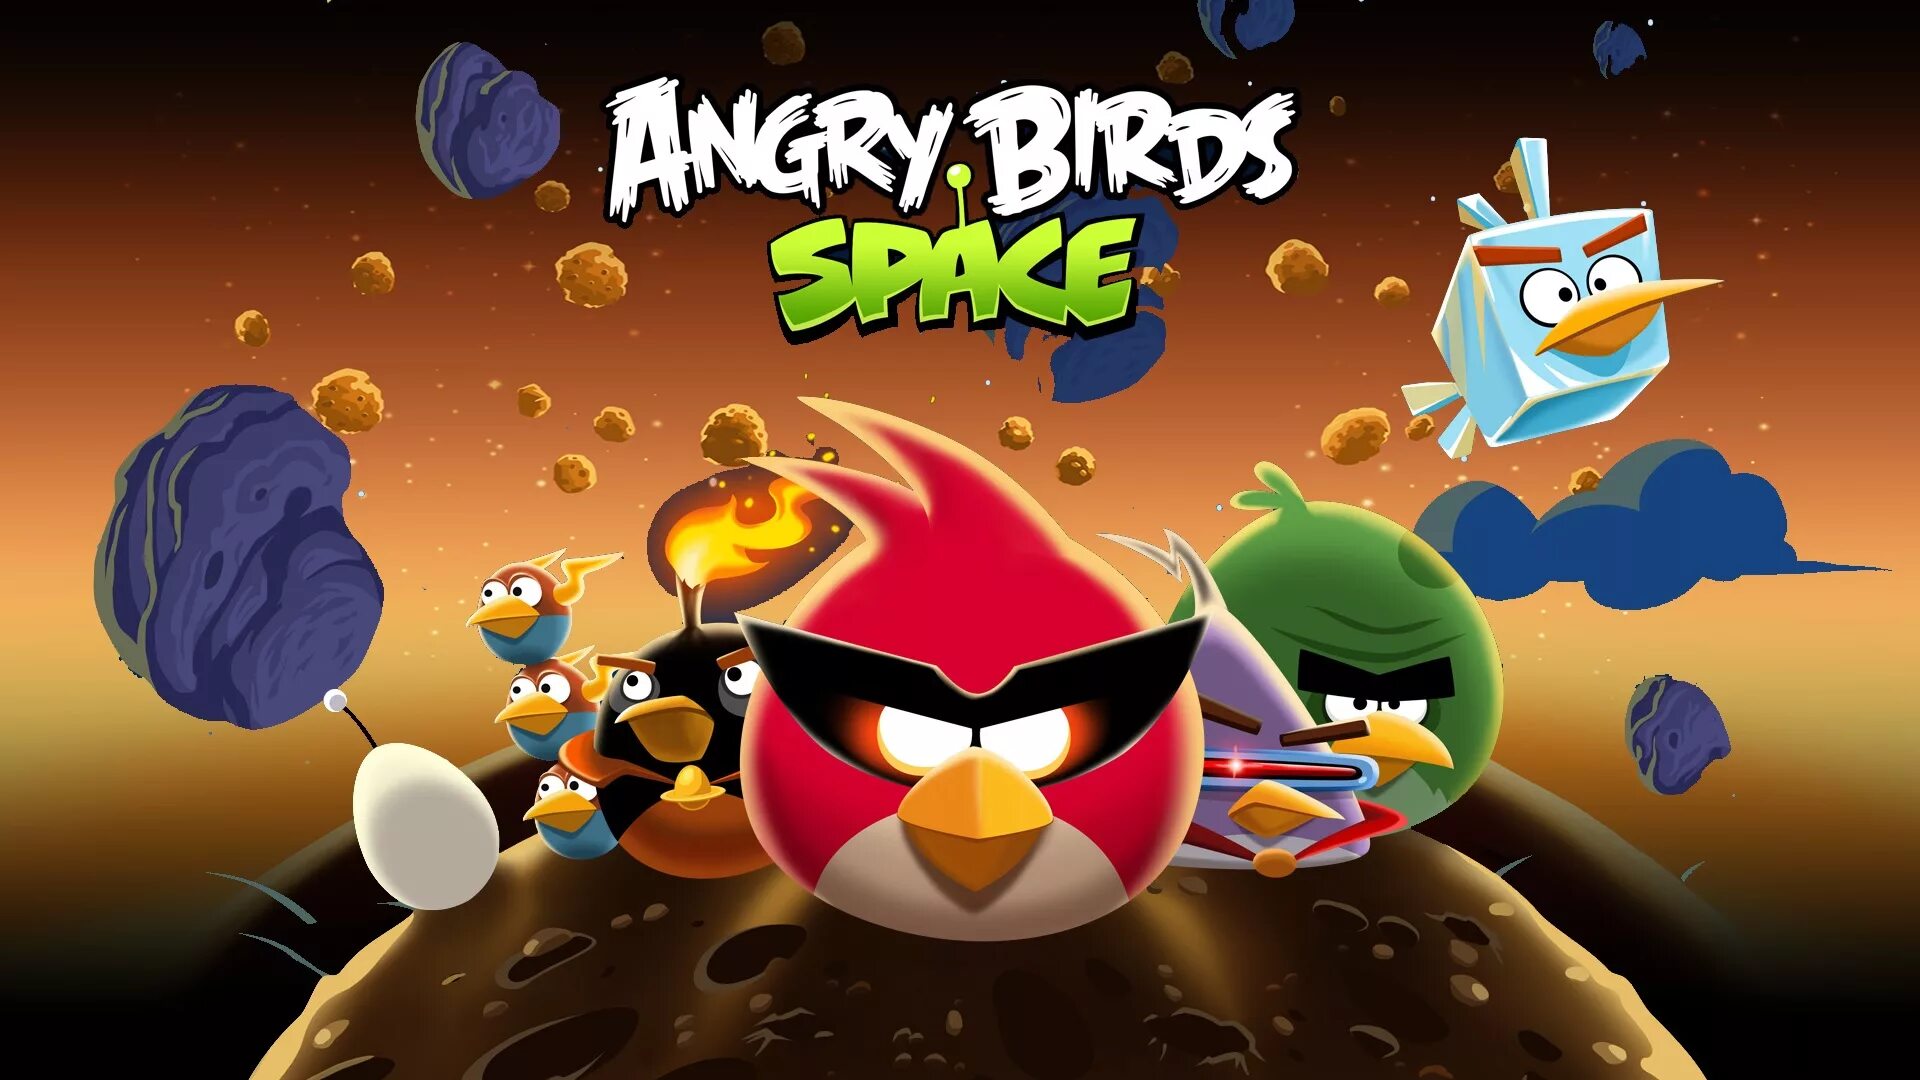 Angry Birds Space игра. Angry Birds Space 2012. Angry Birds игры Rovio. Angry Birds Space 2.2.1.